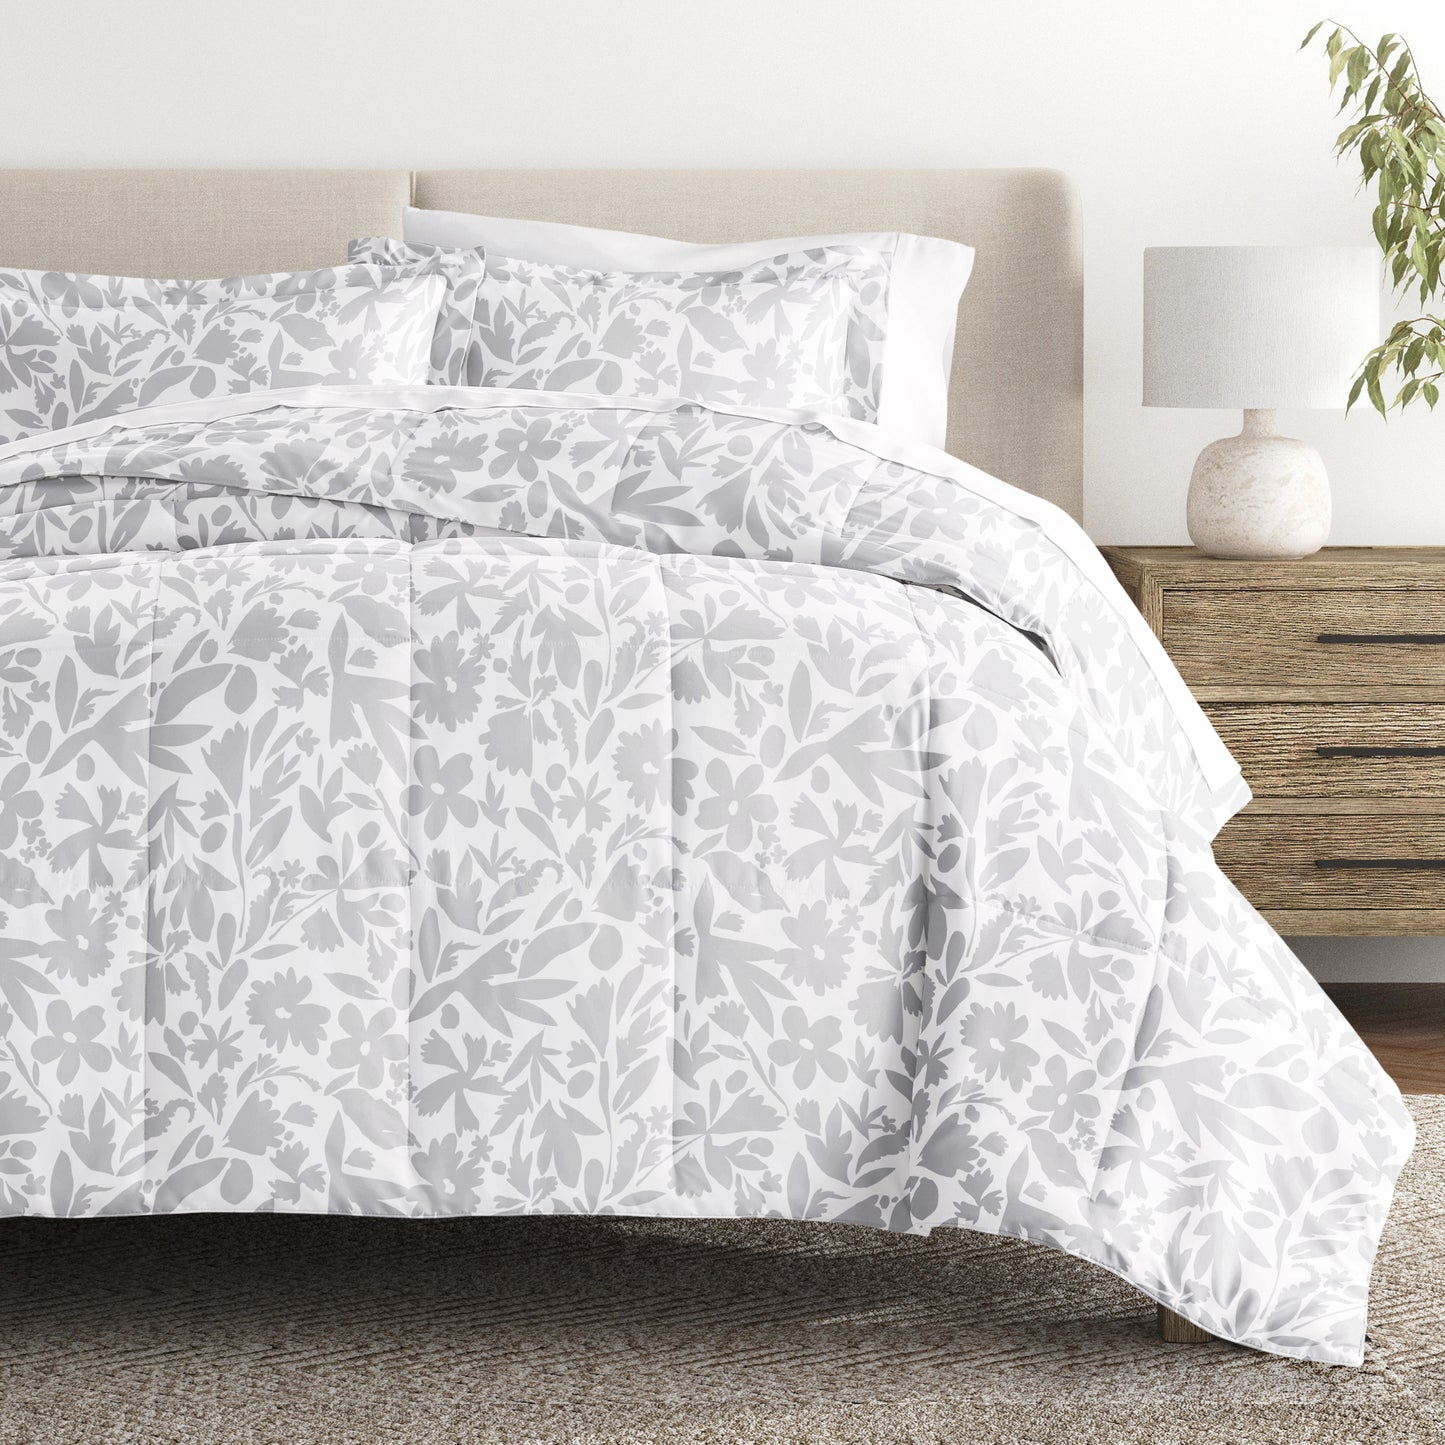 Comforter Sets in Beautiful Patterns – iEnjoy Home